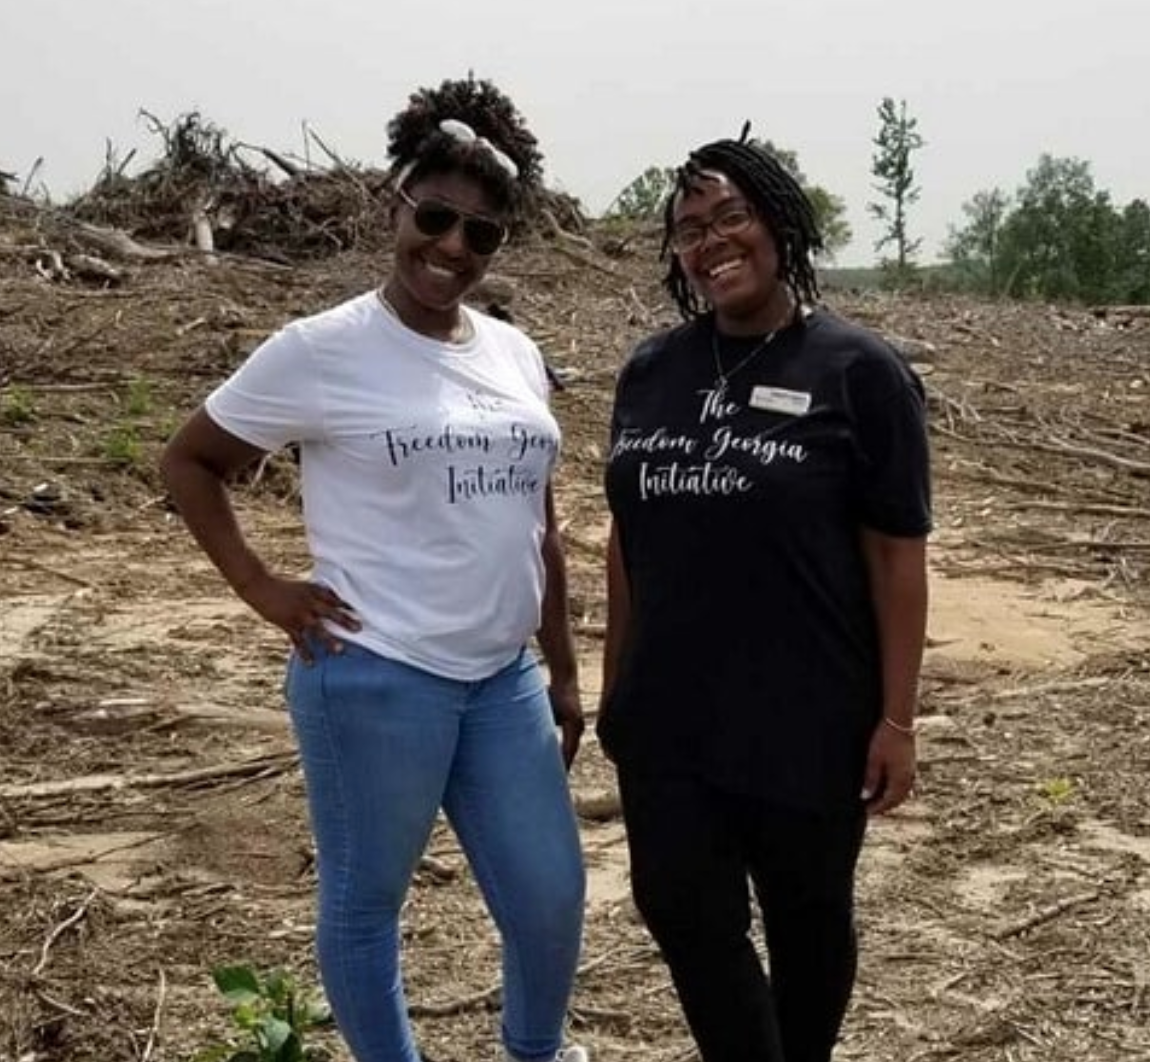 19 Black Families Buy 97 Acres to Start Safe City in Georgia, called Freedom